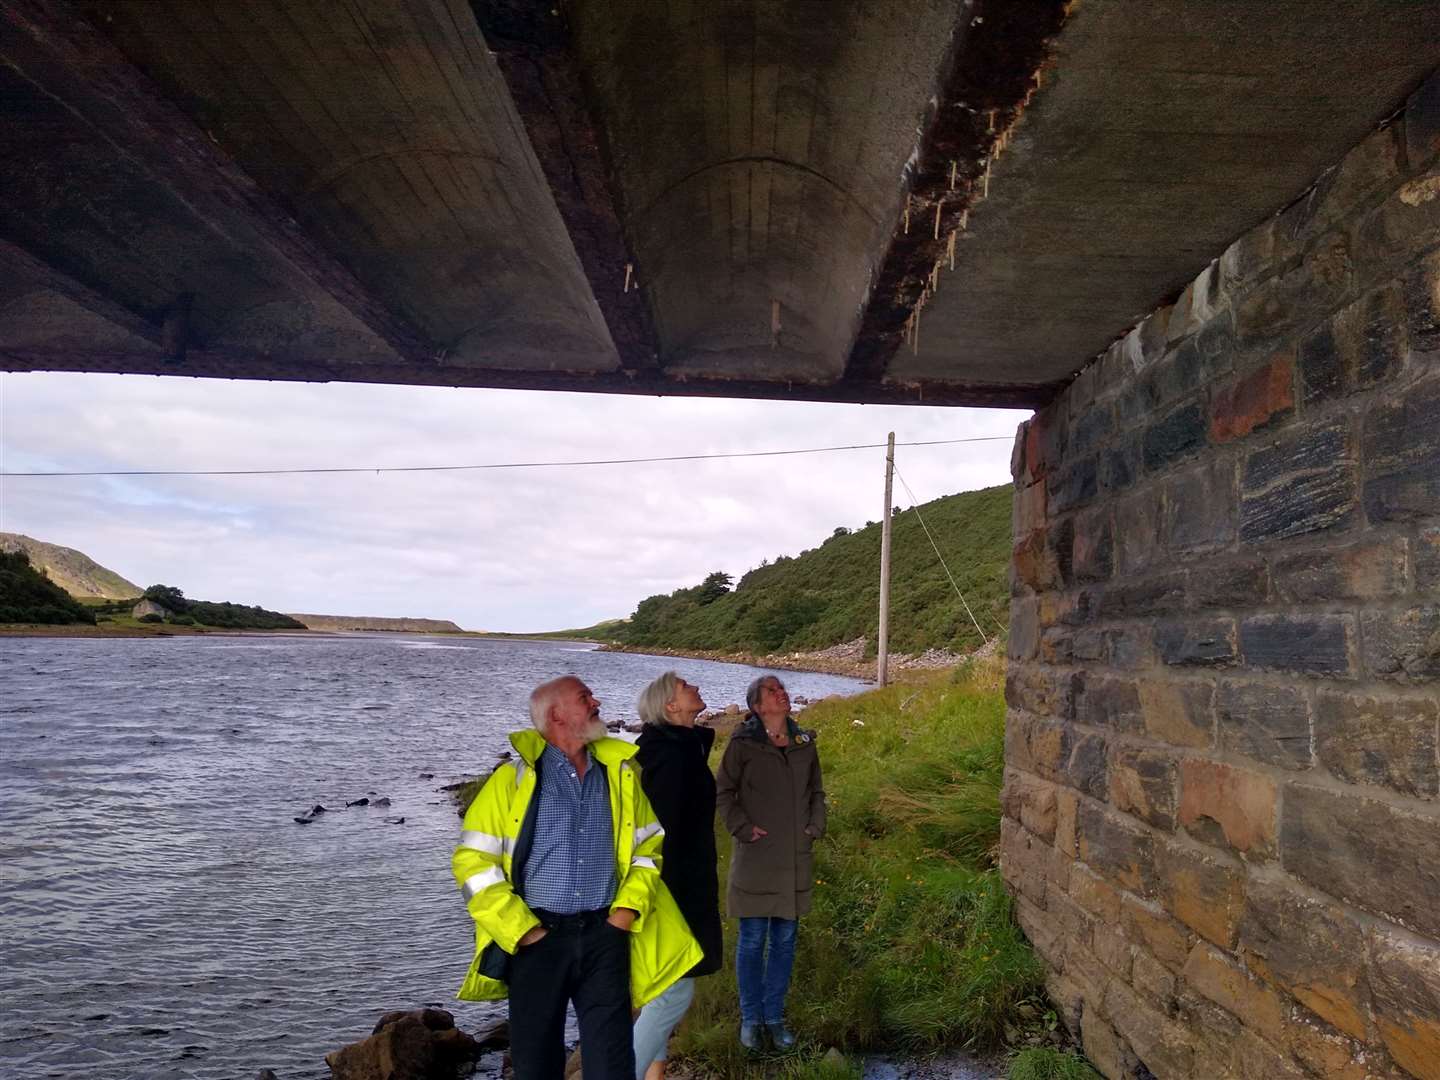 Local people are concerned at the state of the 142-year-old bridge which has corroded metal work, broken tar and crumbling stonework.